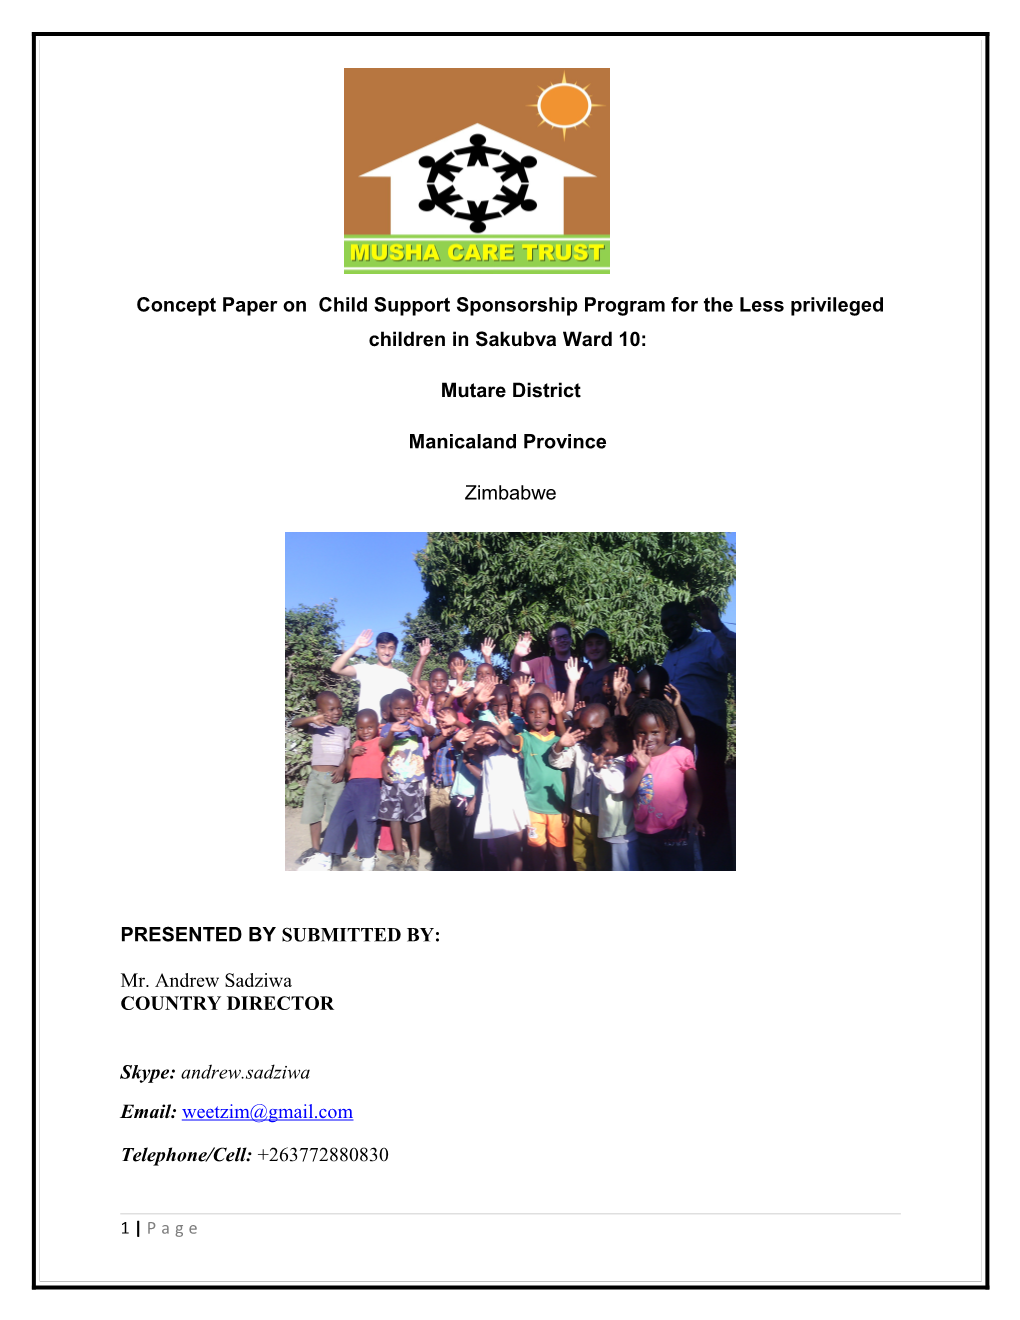 Concept Paper on Child Support Sponsorship Program for the Less Privileged Children In